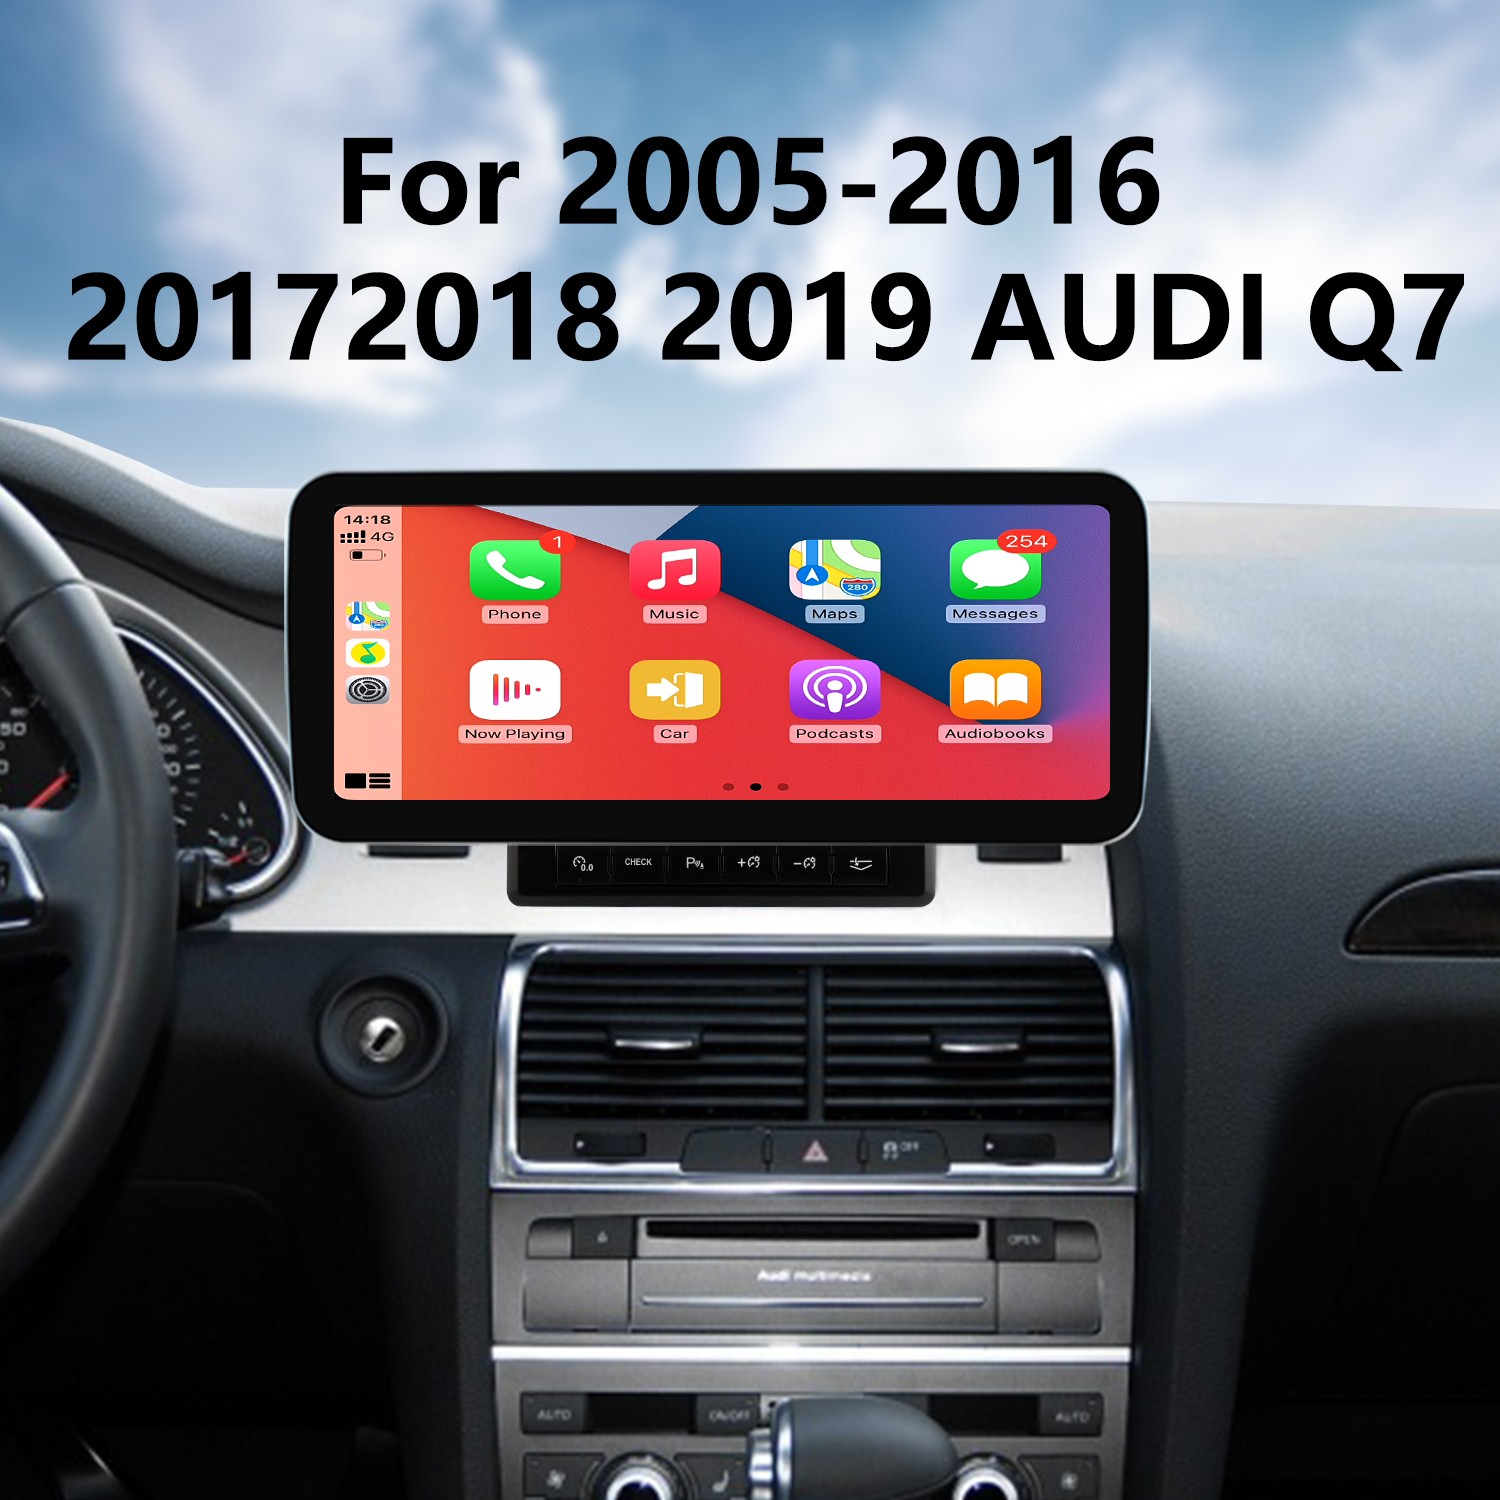 Car auto navigation 2005-2016 Radio replacement Q7 GPS system 2019 Android 2017 for Bluetooth touchscreen Carpay radio AUDI 2018